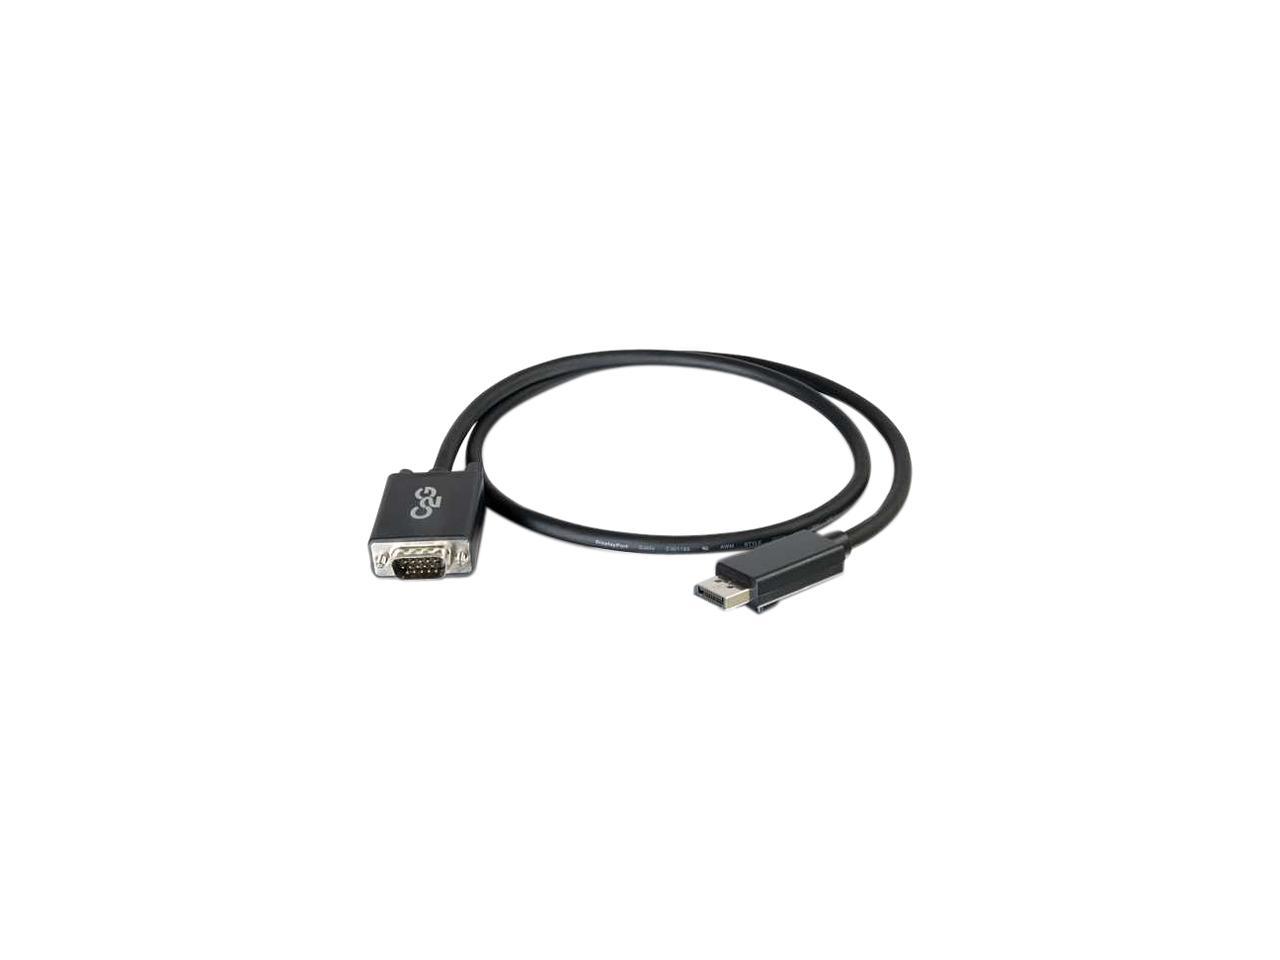 C2G 54331 DisplayPort Male to VGA Male Active Adapter Cable, TAA Compliant, Black (3 Feet, 0.91 Meters)